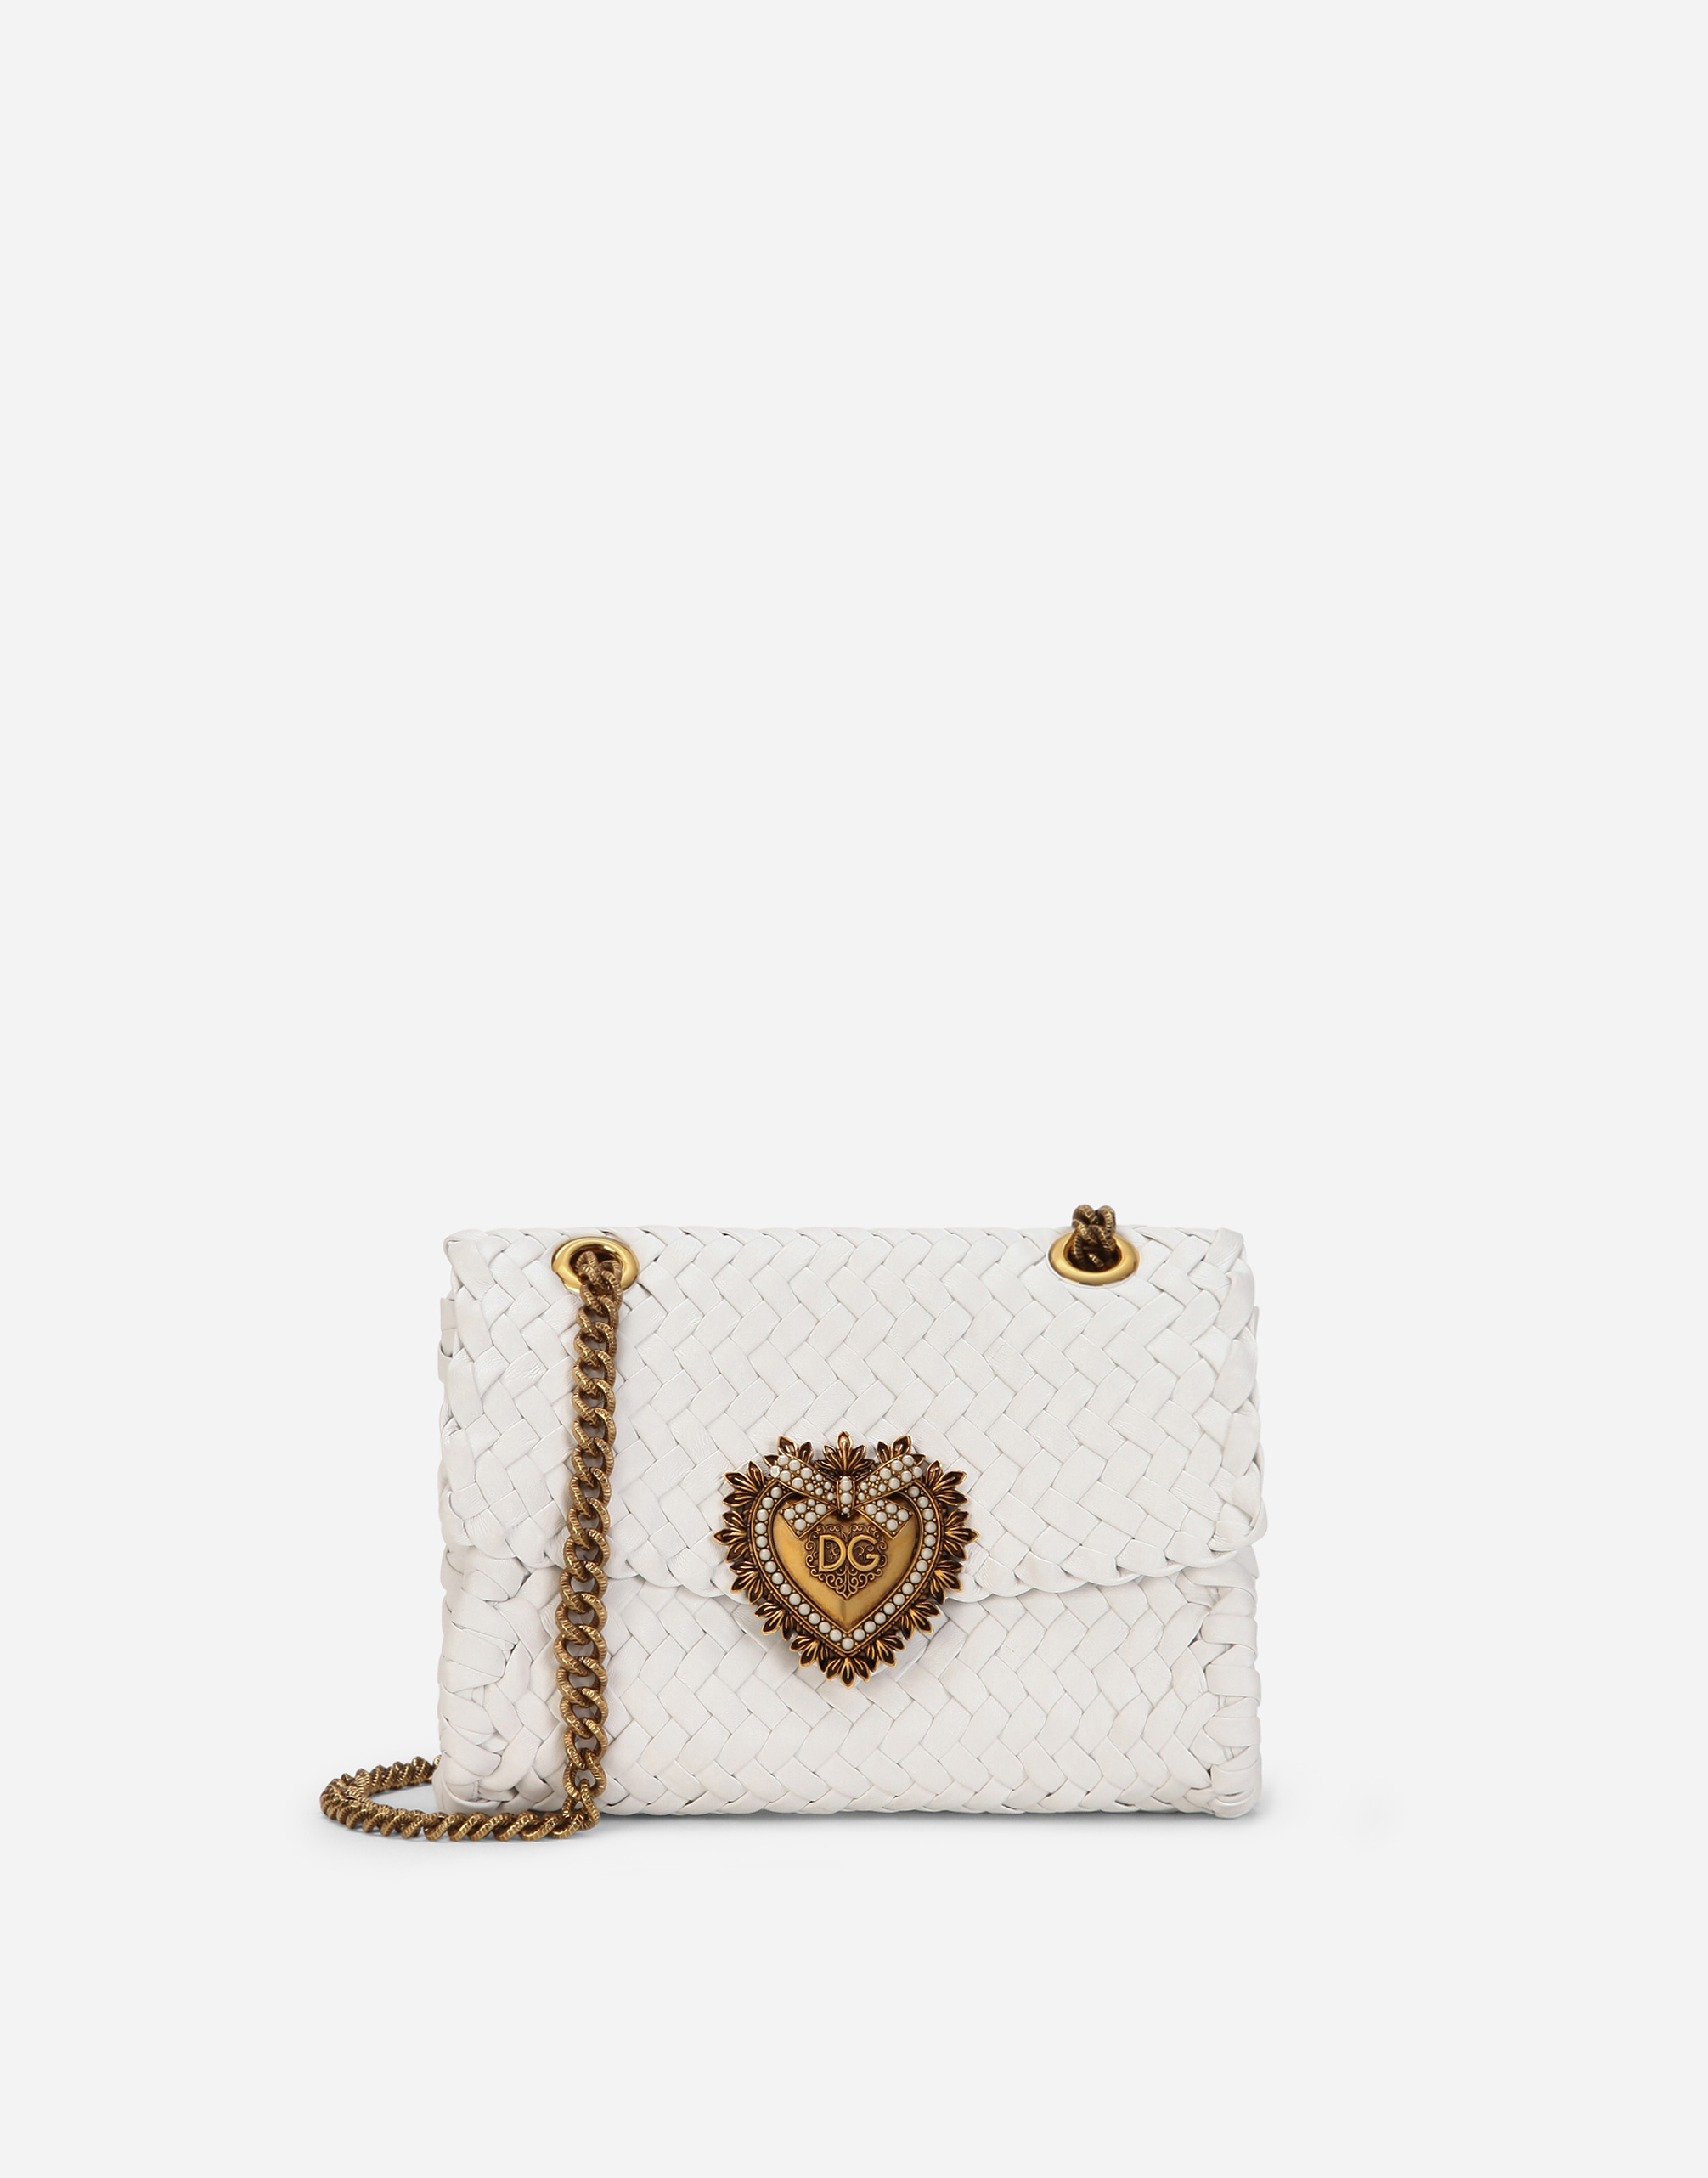 Small Devotion shoulder bag in woven nappa leather in White